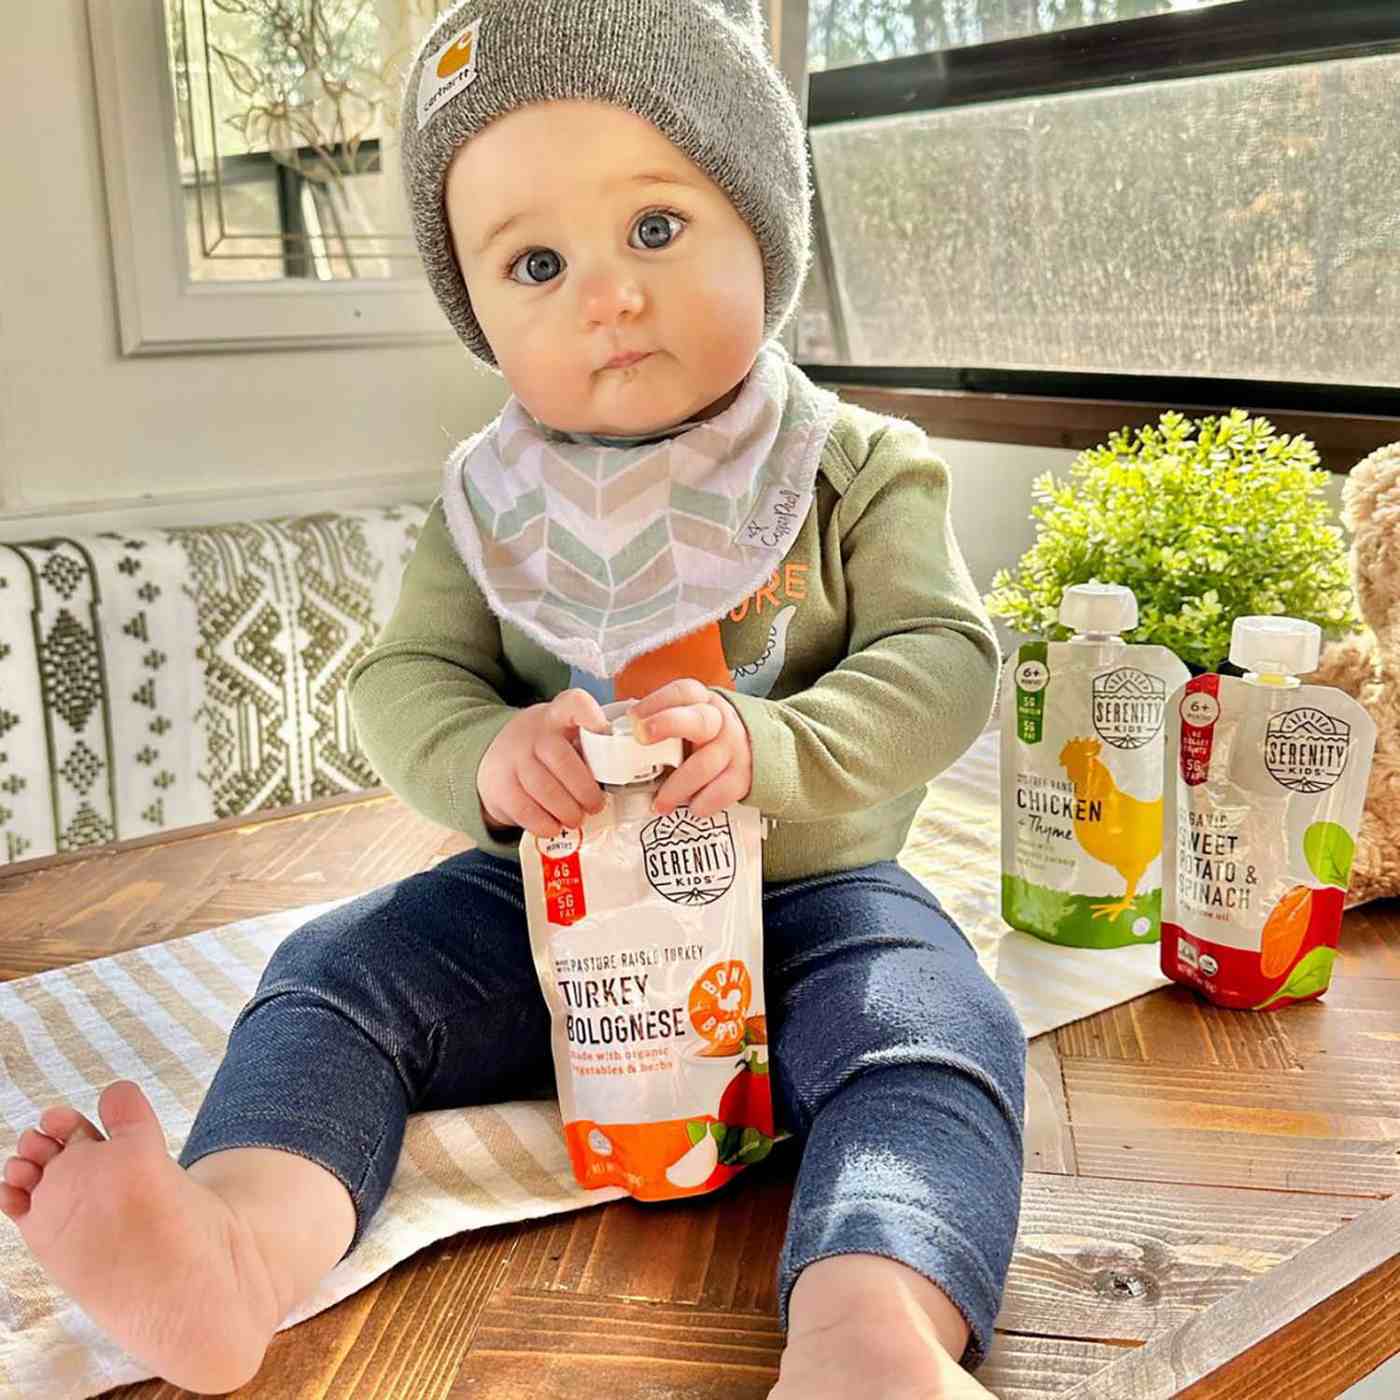 Serenity Kids Turkey Bolognese with Bone Broth Baby Food Pouch; image 4 of 4